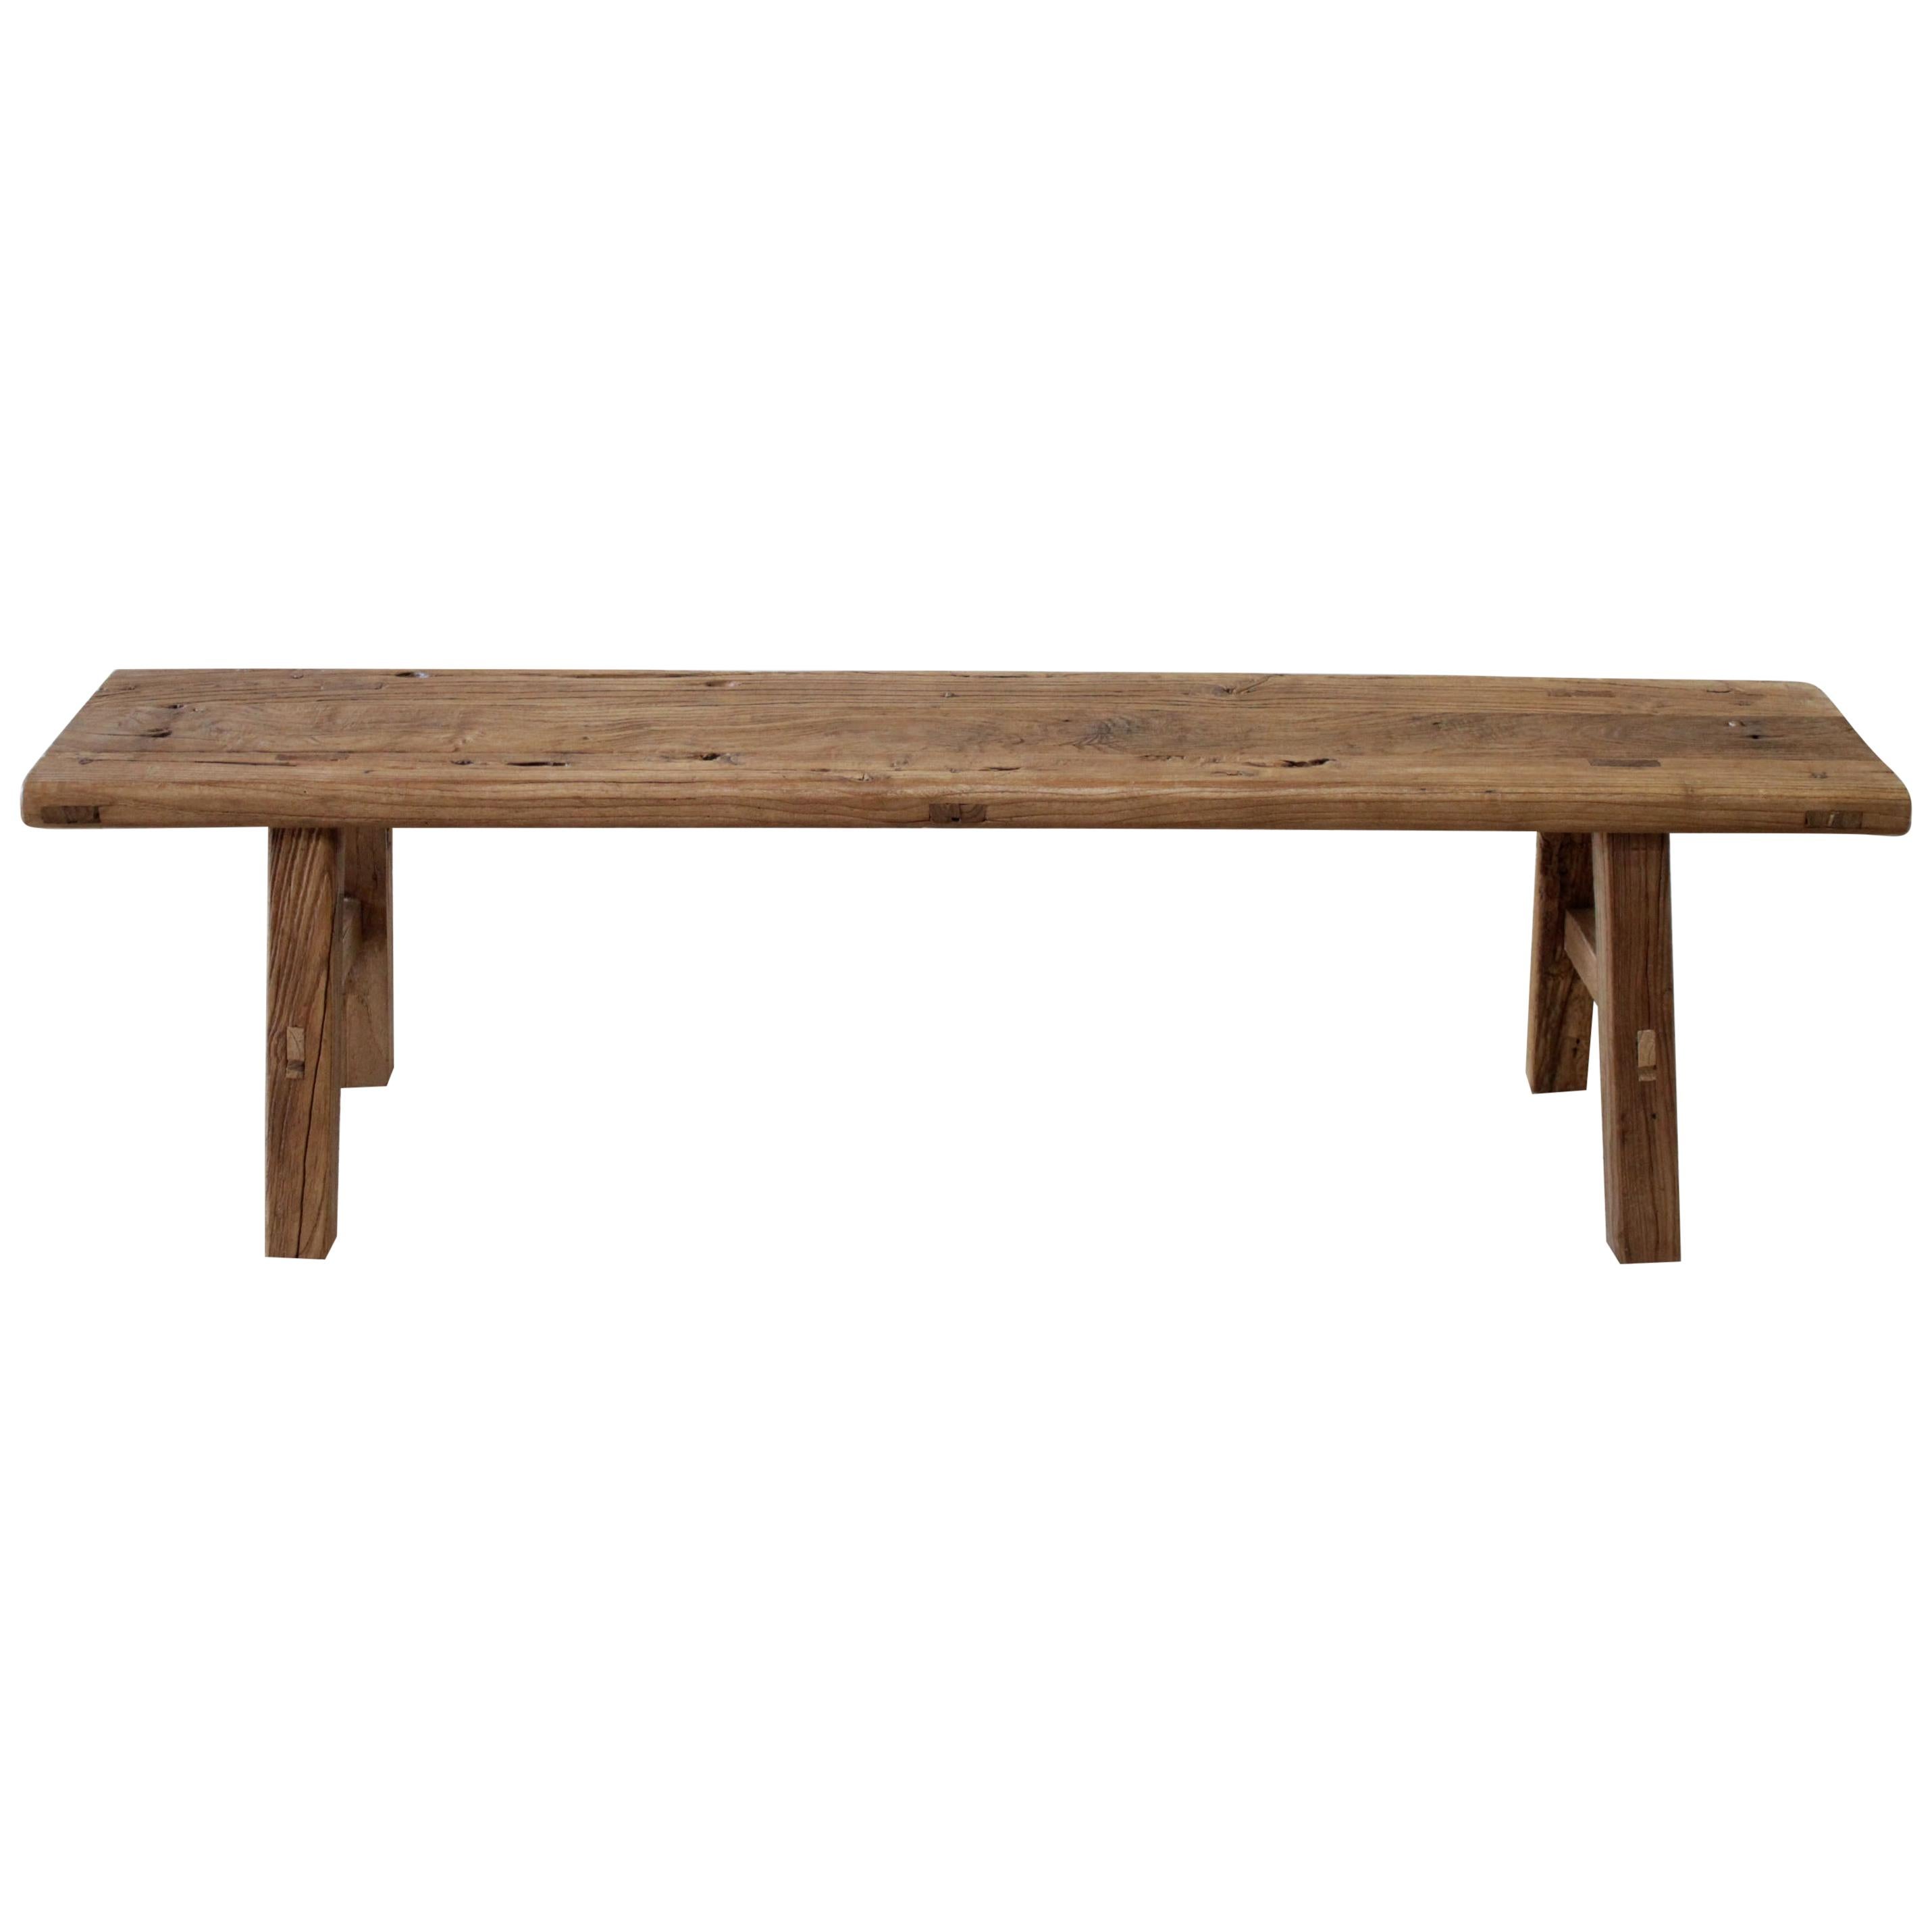 Vintage Reclaimed Natural Elm Wood Bench with Wide Seat